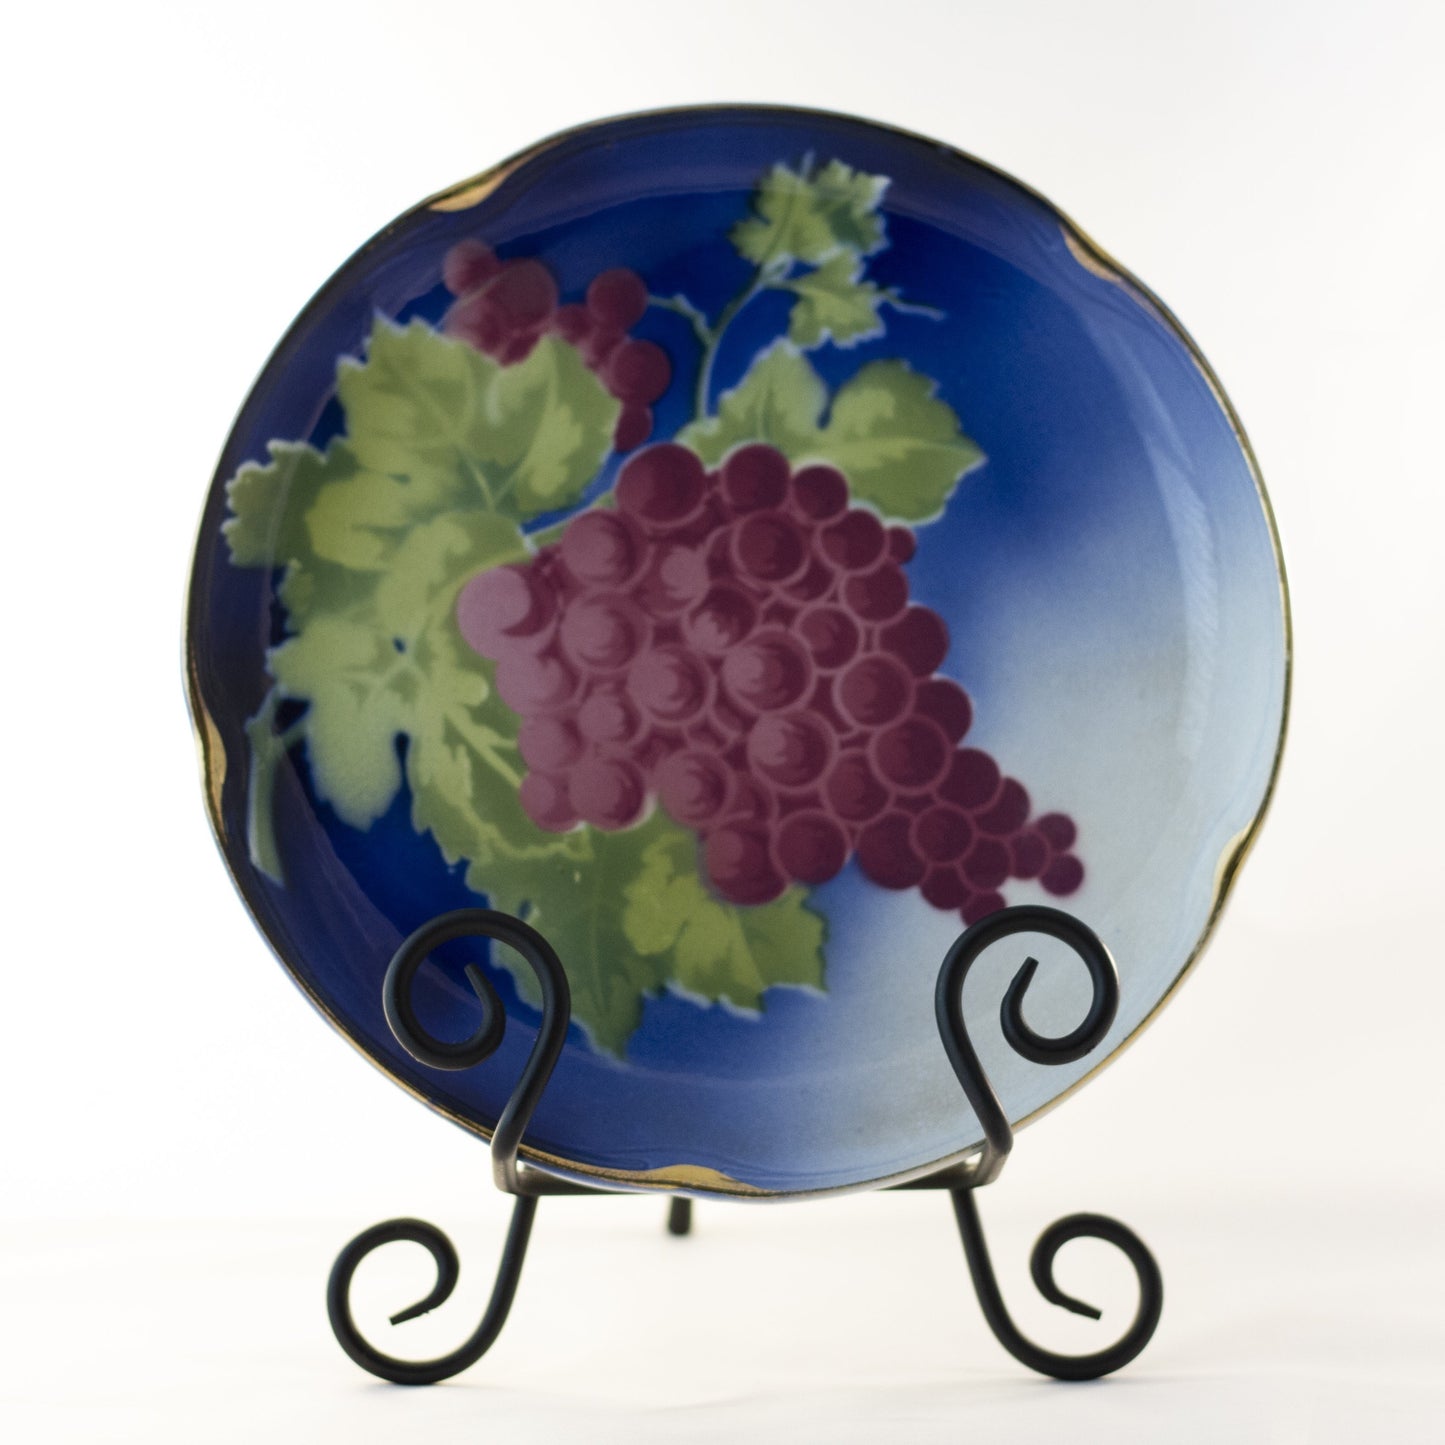 K & G LUNÉVILLE FRENCH FAIENCE PLATE HAND PAINTED GRAPES 8 ½” Gold Gilt Rim Circa 1900